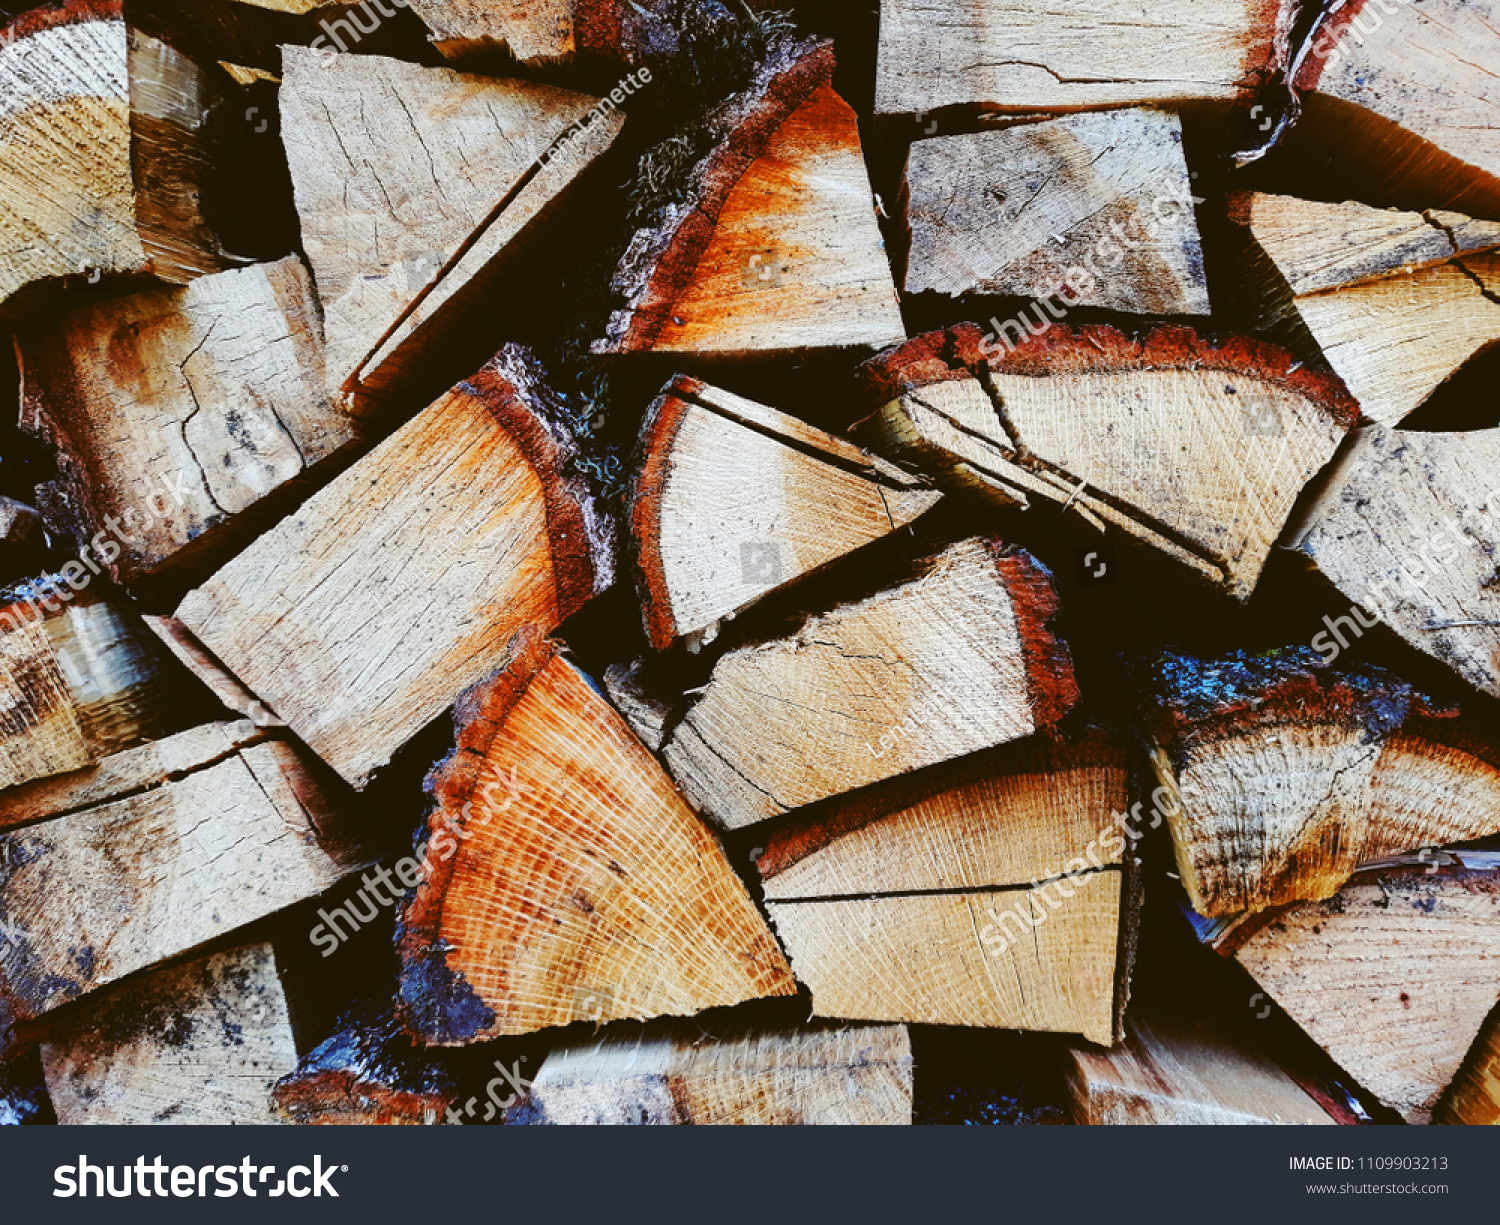 Firewood background, wall firewood, background of dry chopped firewood logs in a pile #1109903213